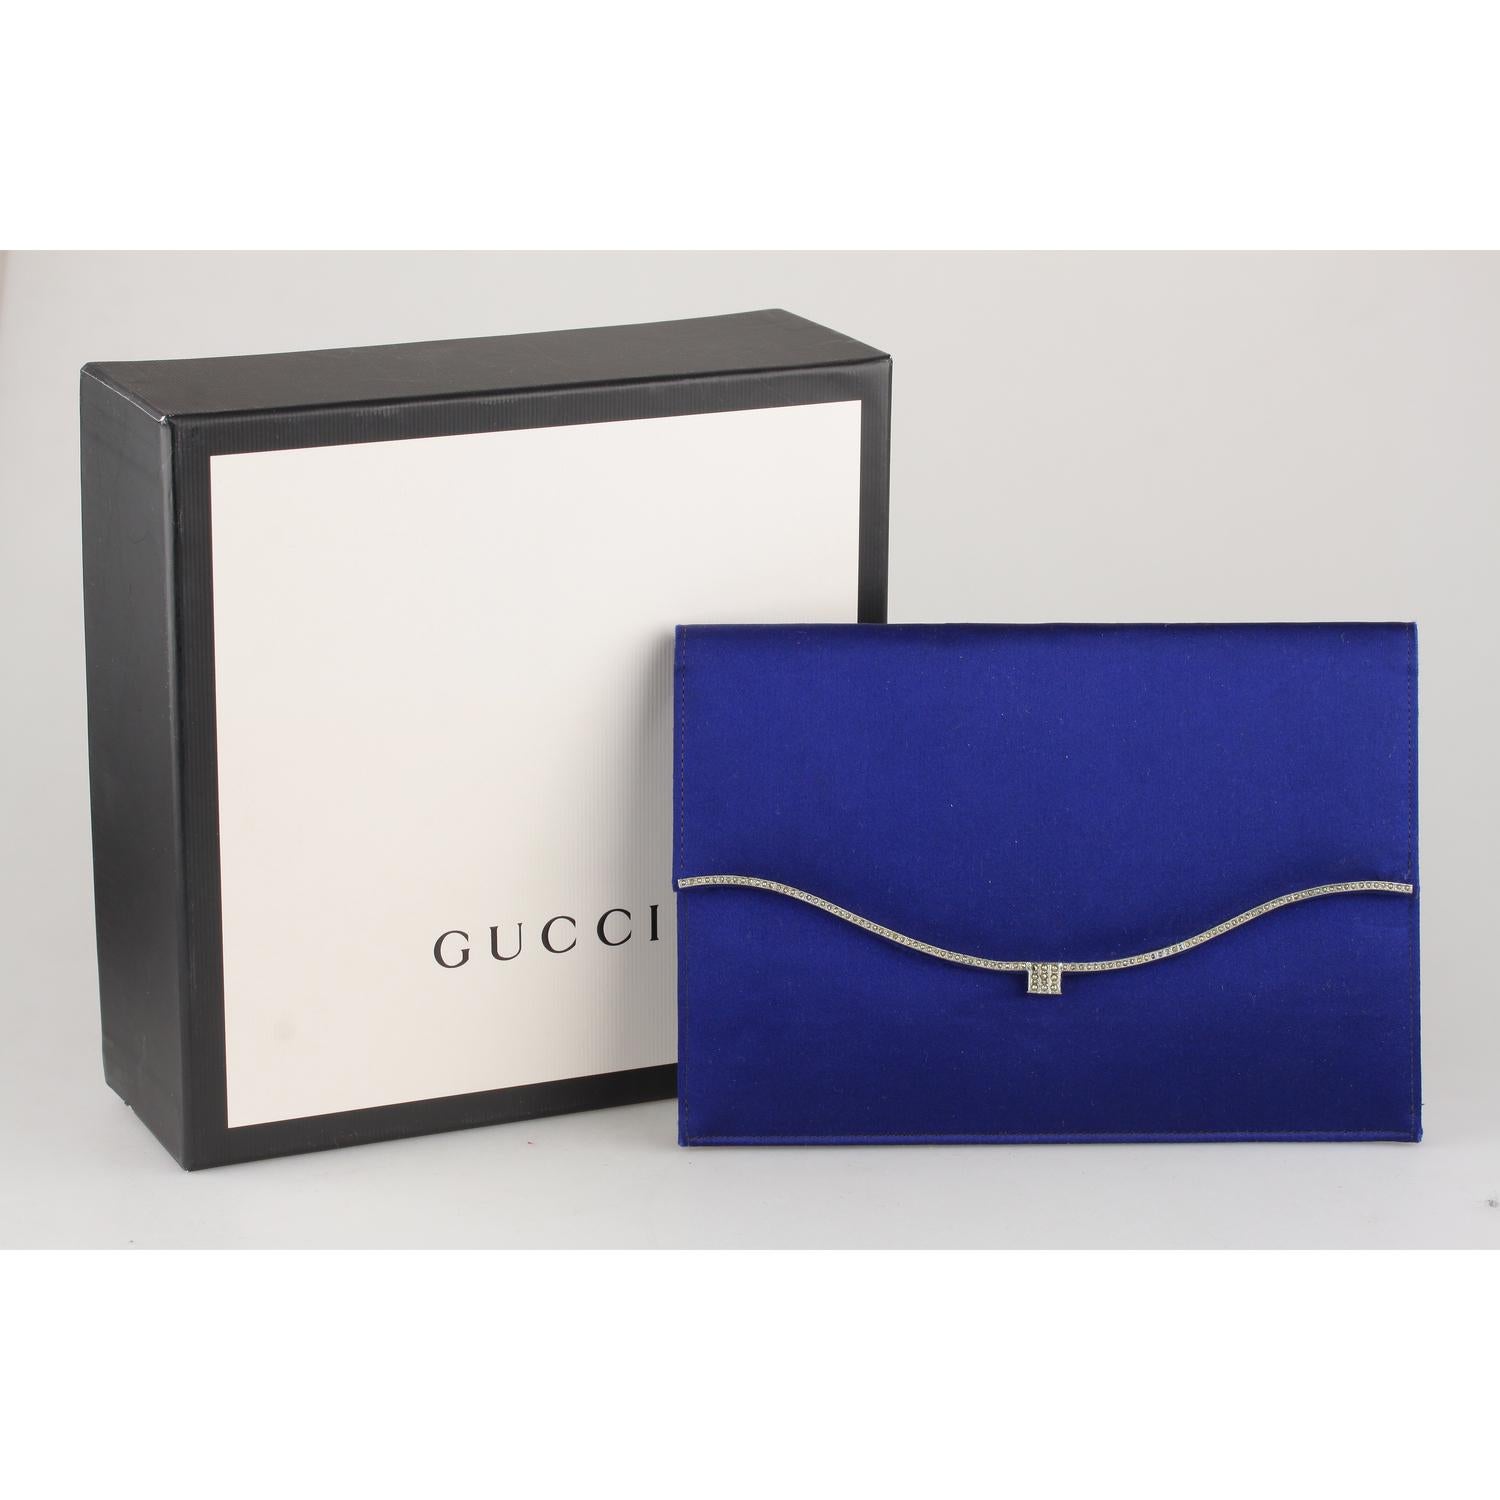 Vintage Gucci evening clutch bag in blue satin from the early 60s. 

Material: Satin
Color: Blue
Model: Evening Bag
Gender: Women
Country of Manufacture: Italy
Size: Small bags
Bag Depth: -
Bag Height: 5 inches - 12,7 cm 
Bag Length: 7 inches - 17,8